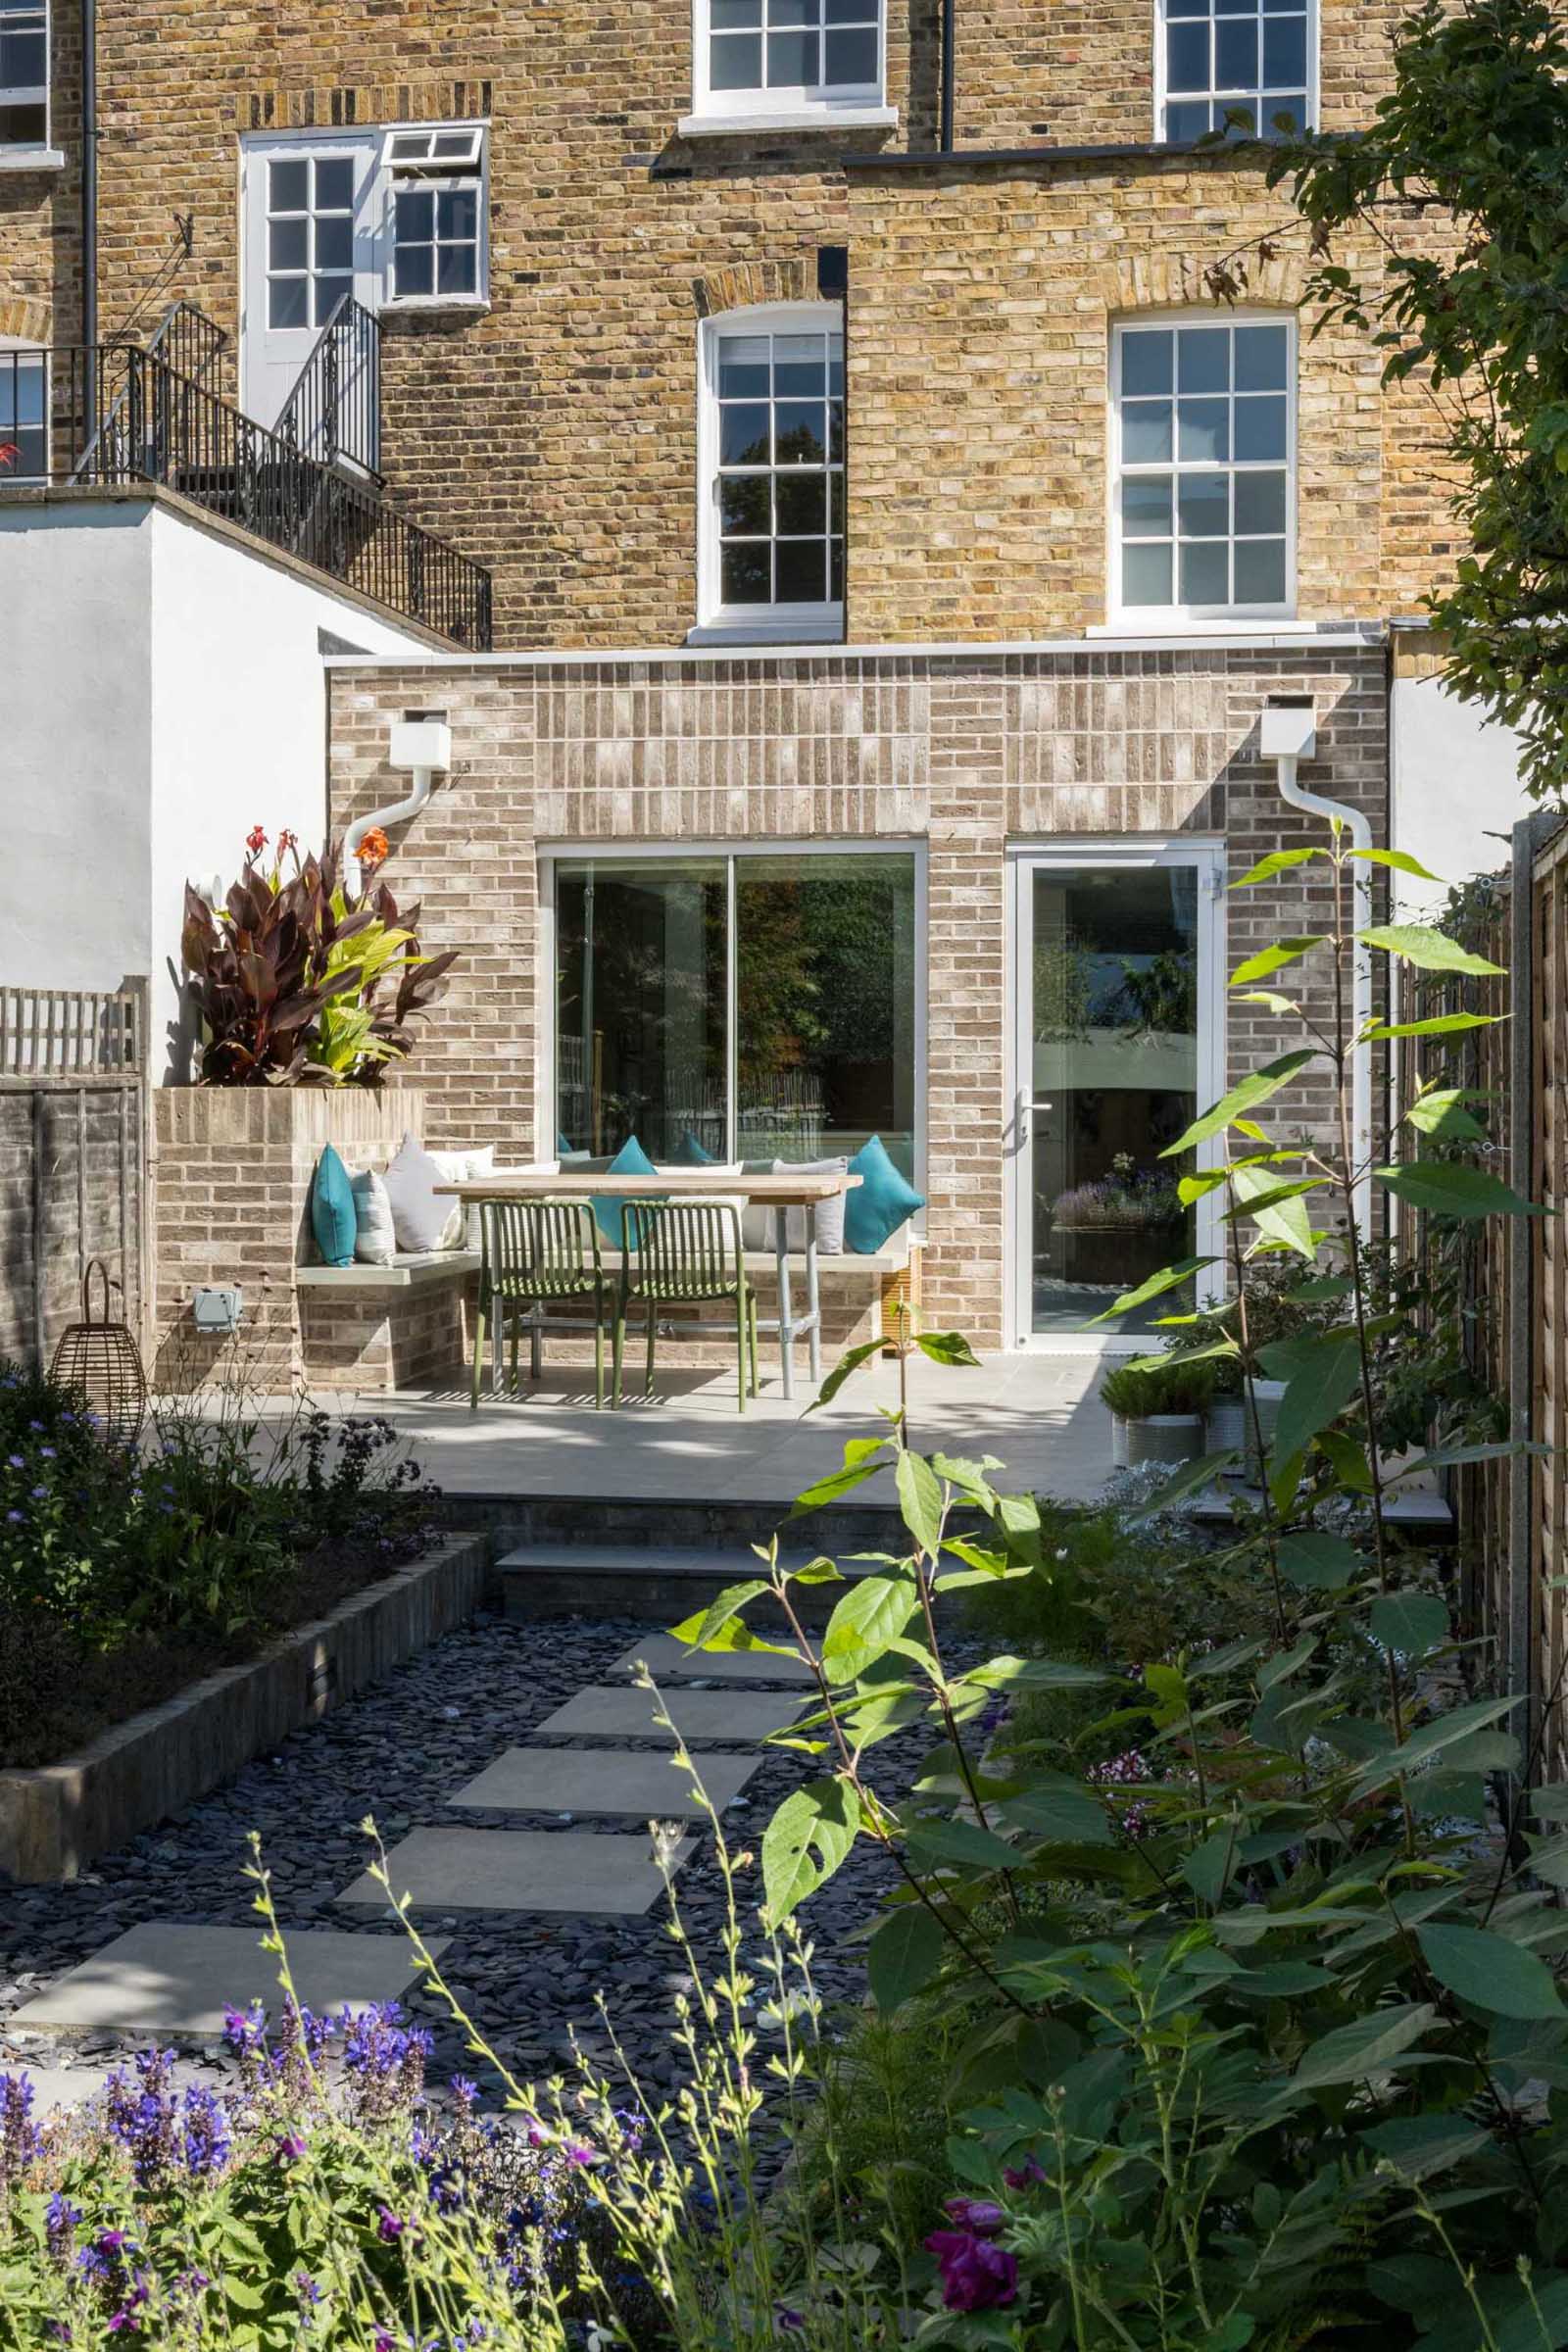 A Grade II listed terrace home in Islington, England, received a new brick addition with outdoor seating.